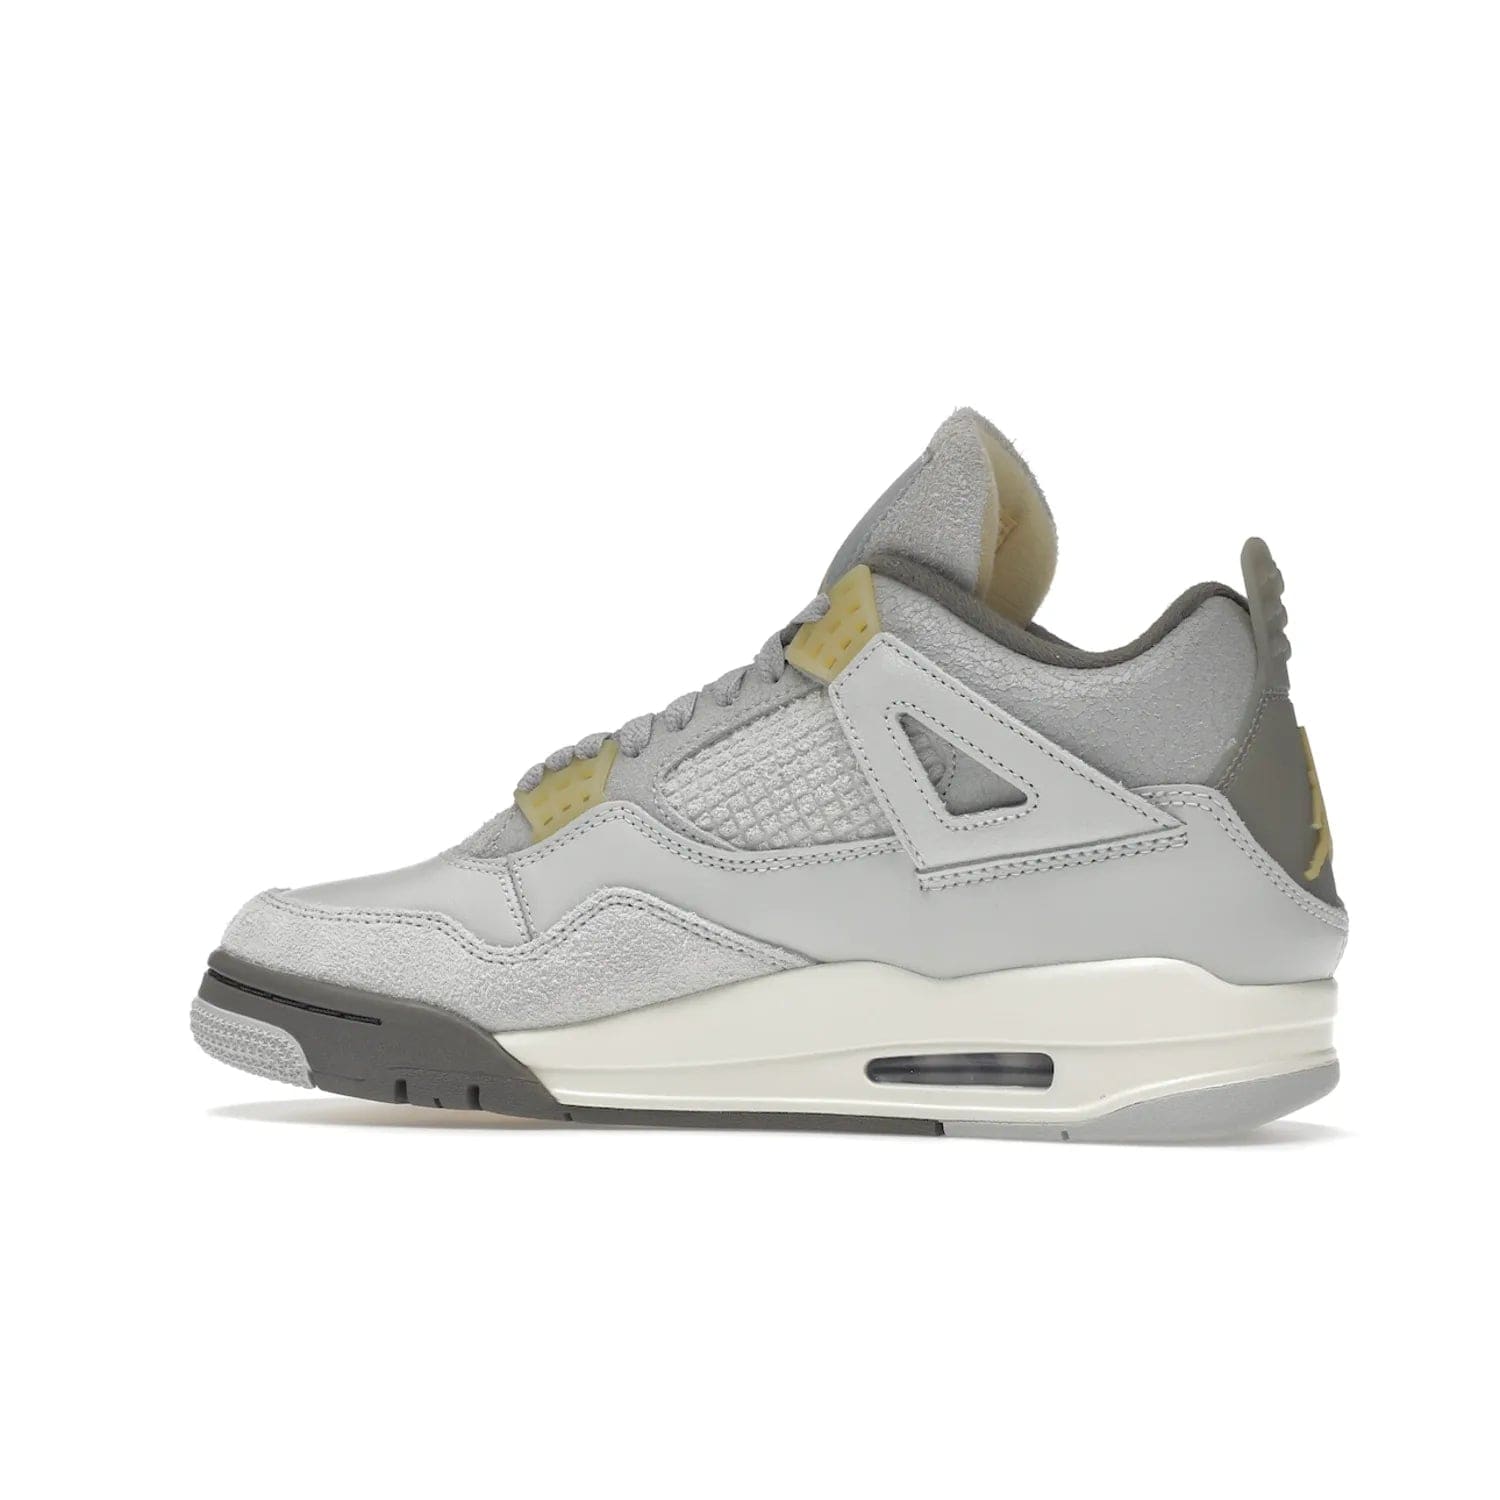 Jordan 4 Retro SE Craft Photon Dust - Image 21 - Only at www.BallersClubKickz.com - Upgrade your shoe collection with the Air Jordan 4 Retro SE Craft Photon Dust. This luxurious sneaker features a combination of suede and leather with unique grey tones like Photon Dust, Pale Vanilla, Off White, Grey Fog, Flat Pewter, and Sail. Available February 11, 2023.